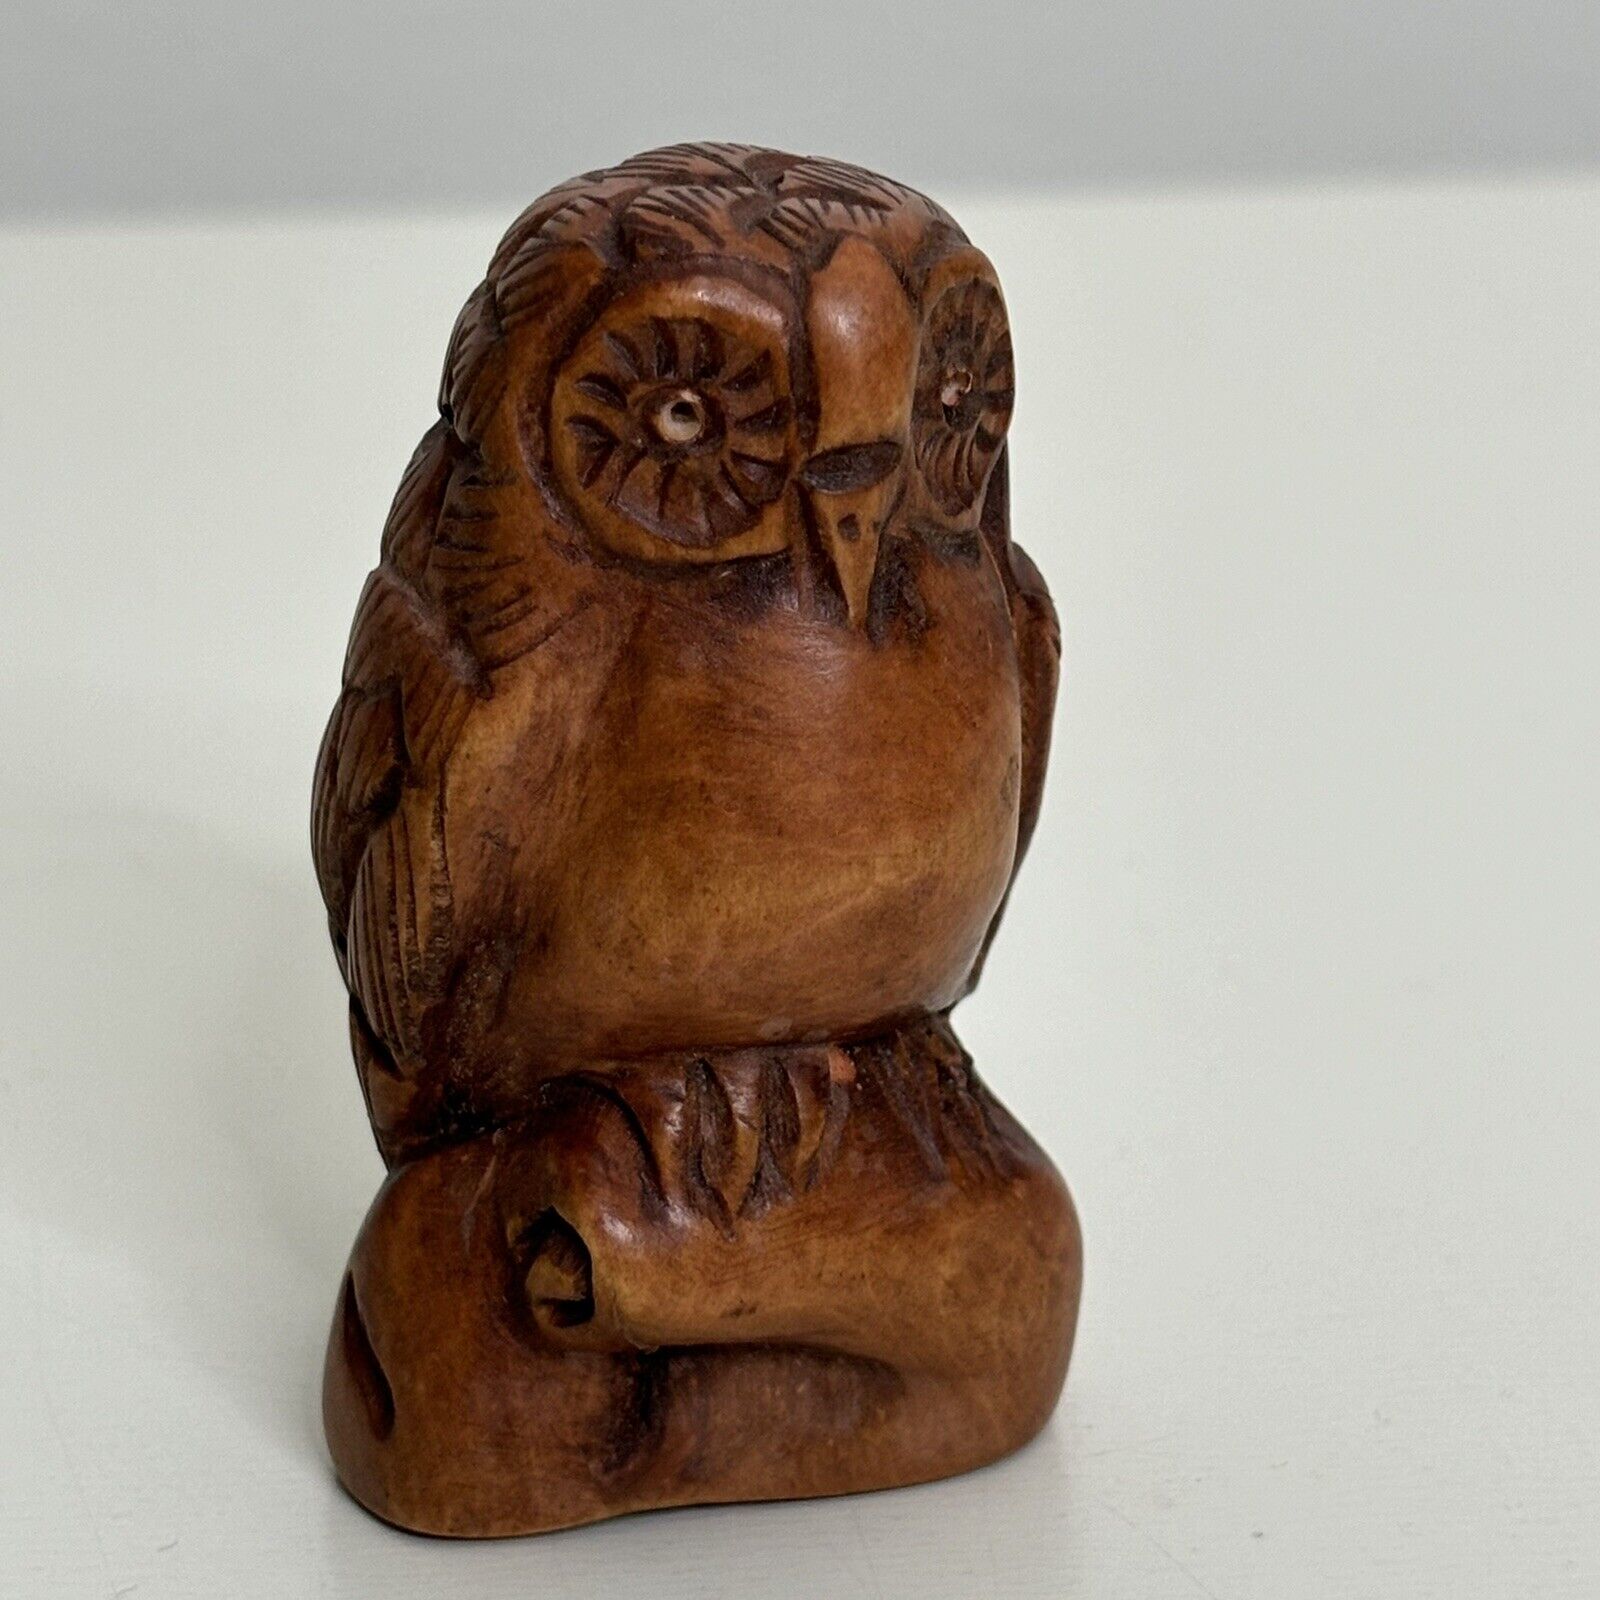 Vintage Hand Carved Small Wooden Wise Owl MCM Statue Figurine Folk Art